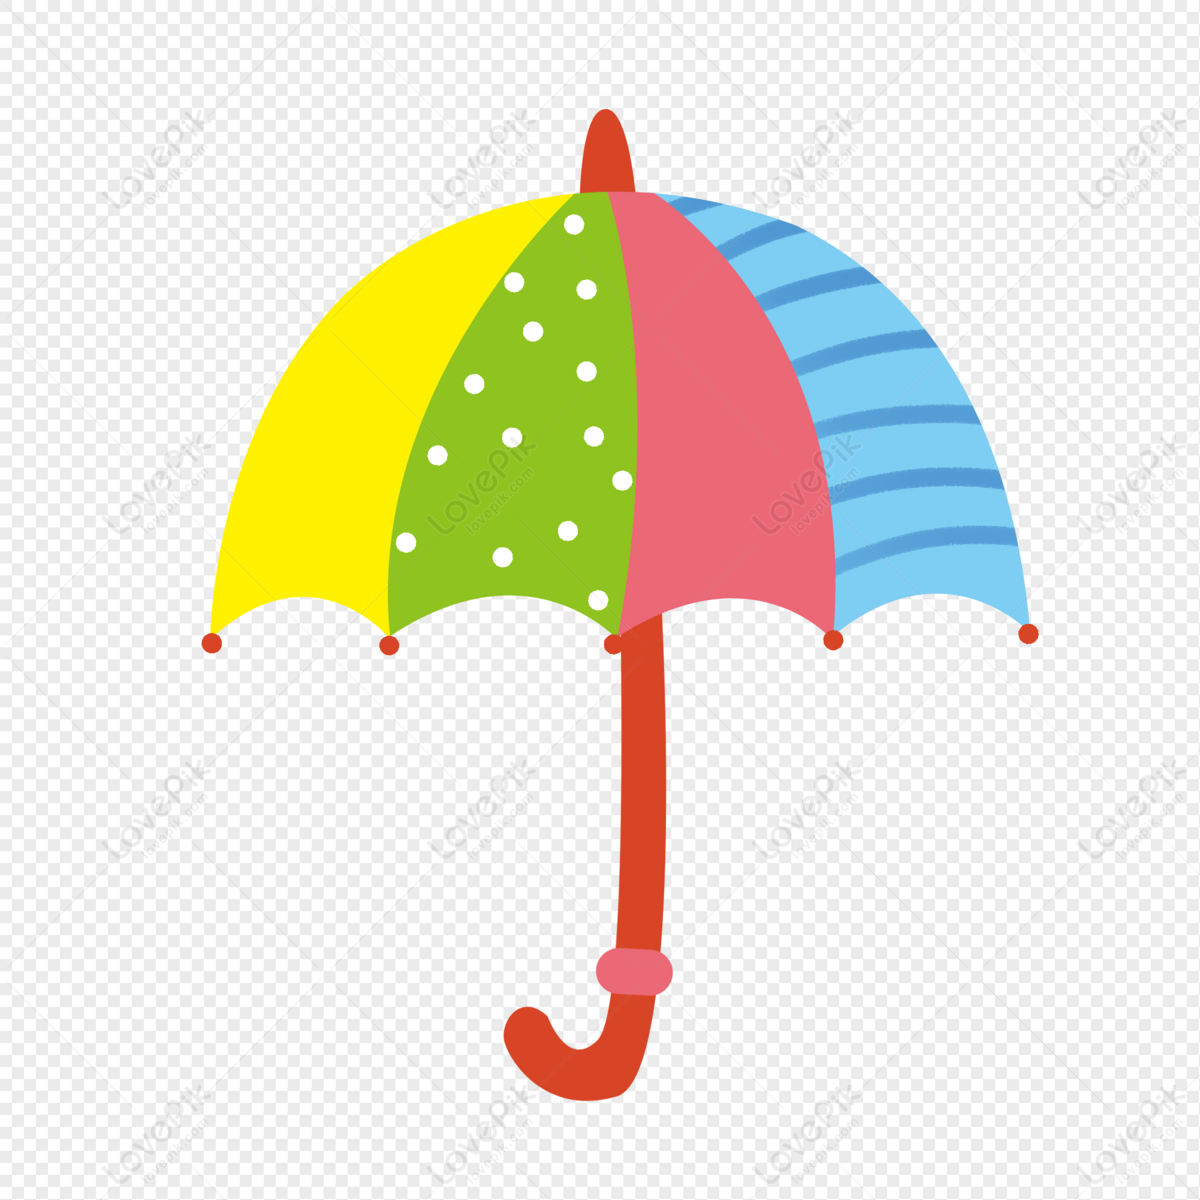 Umbrella PNG Image Free Download And Clipart Image For Free Download -  Lovepik | 401292311